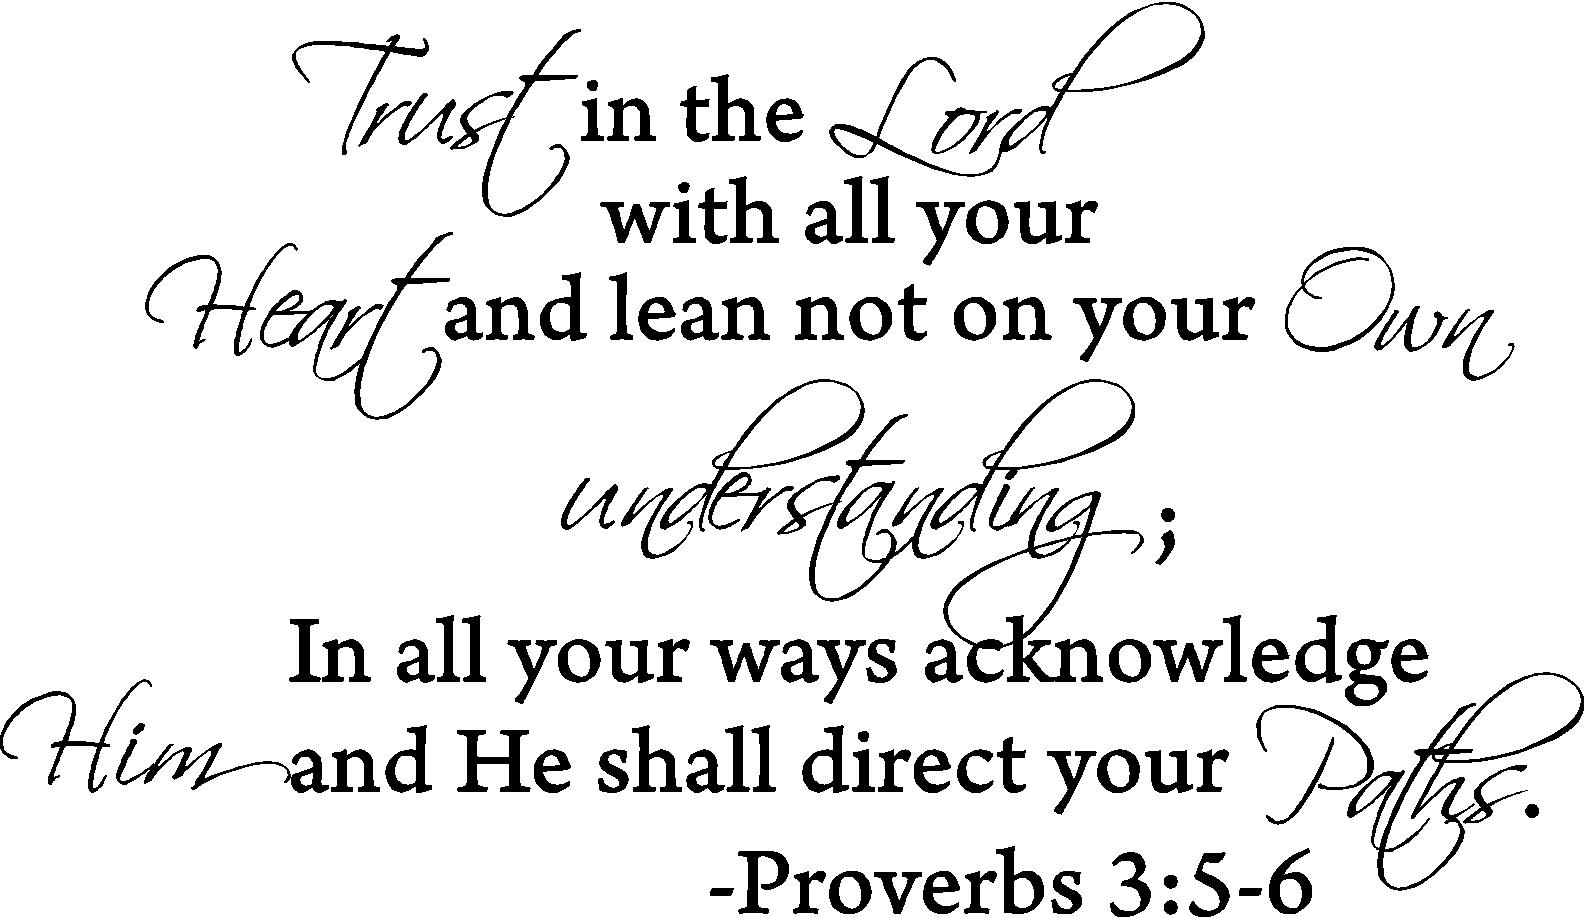 Trust in the lord with all your heart proverbs 3:5-6 Vinyl wall